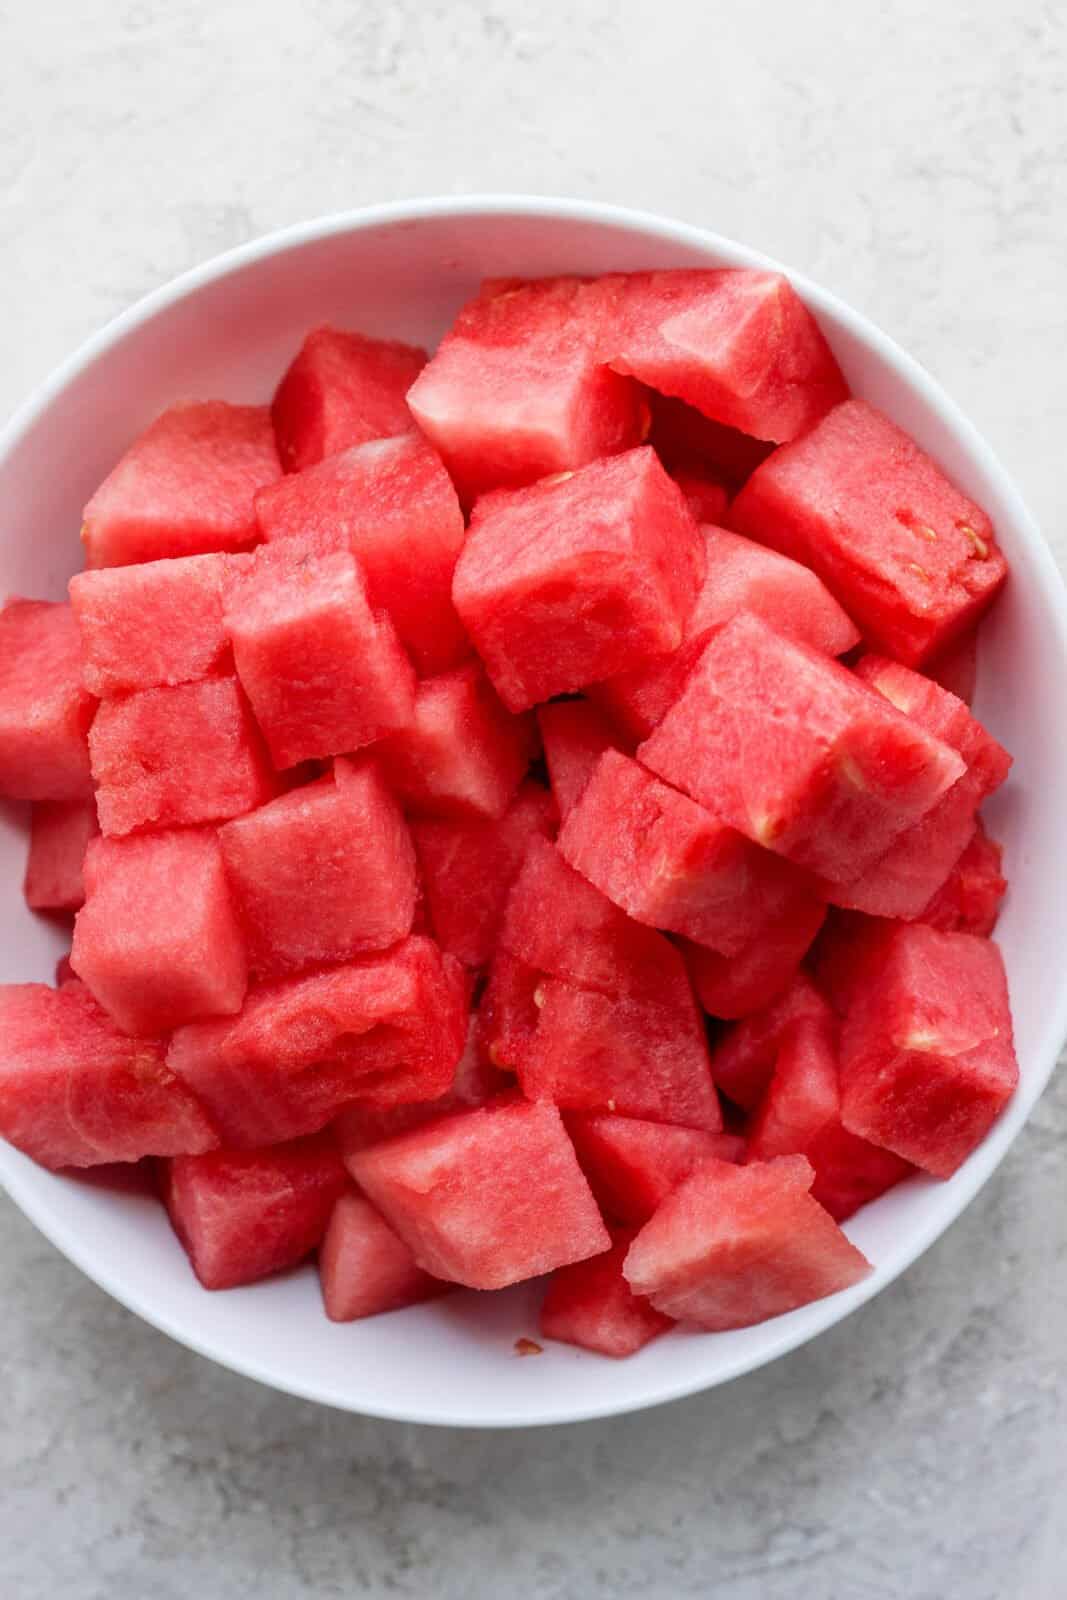 A bowl of cut up watermelon.